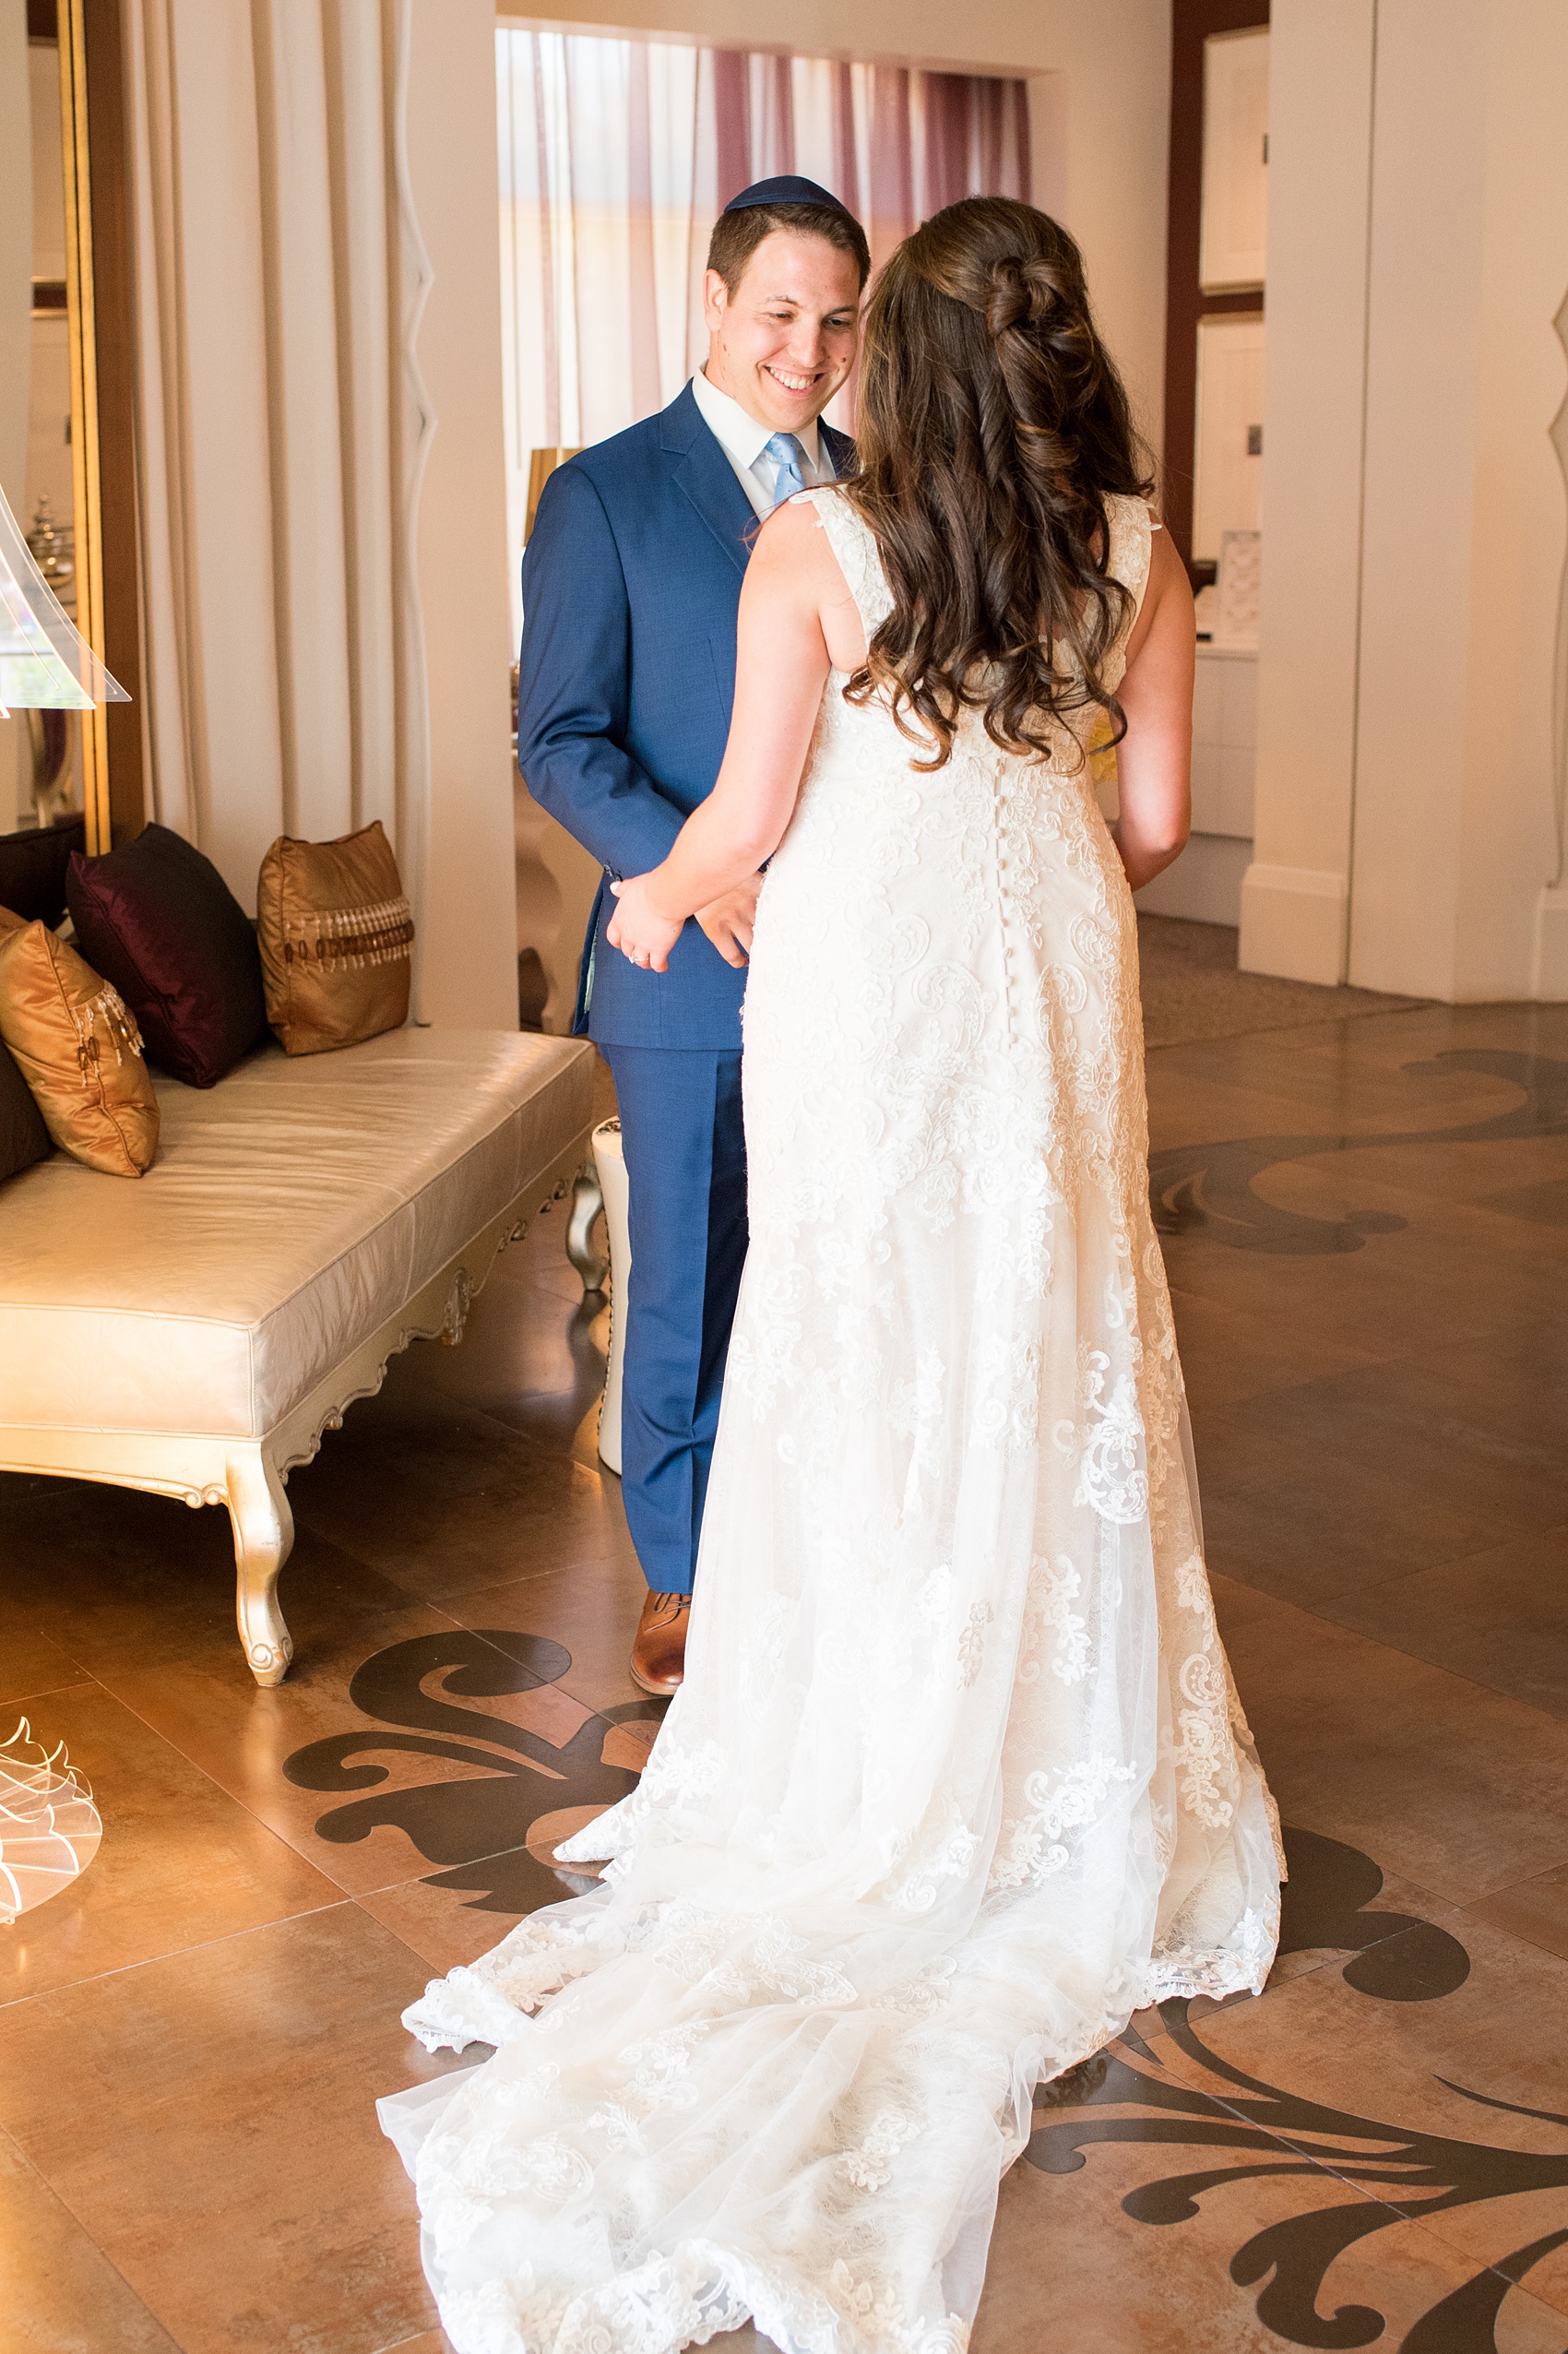 Eau Palm Beach wedding photos by Mikkel Paige Photography. This luxury Florida resort is a beautiful location for a destination wedding. The bride and groom shared a beautiful first look. #WestPalmBeach #EauPalmBeach #BeachWedding #FloridaWeddings #BeachBride #firstlook